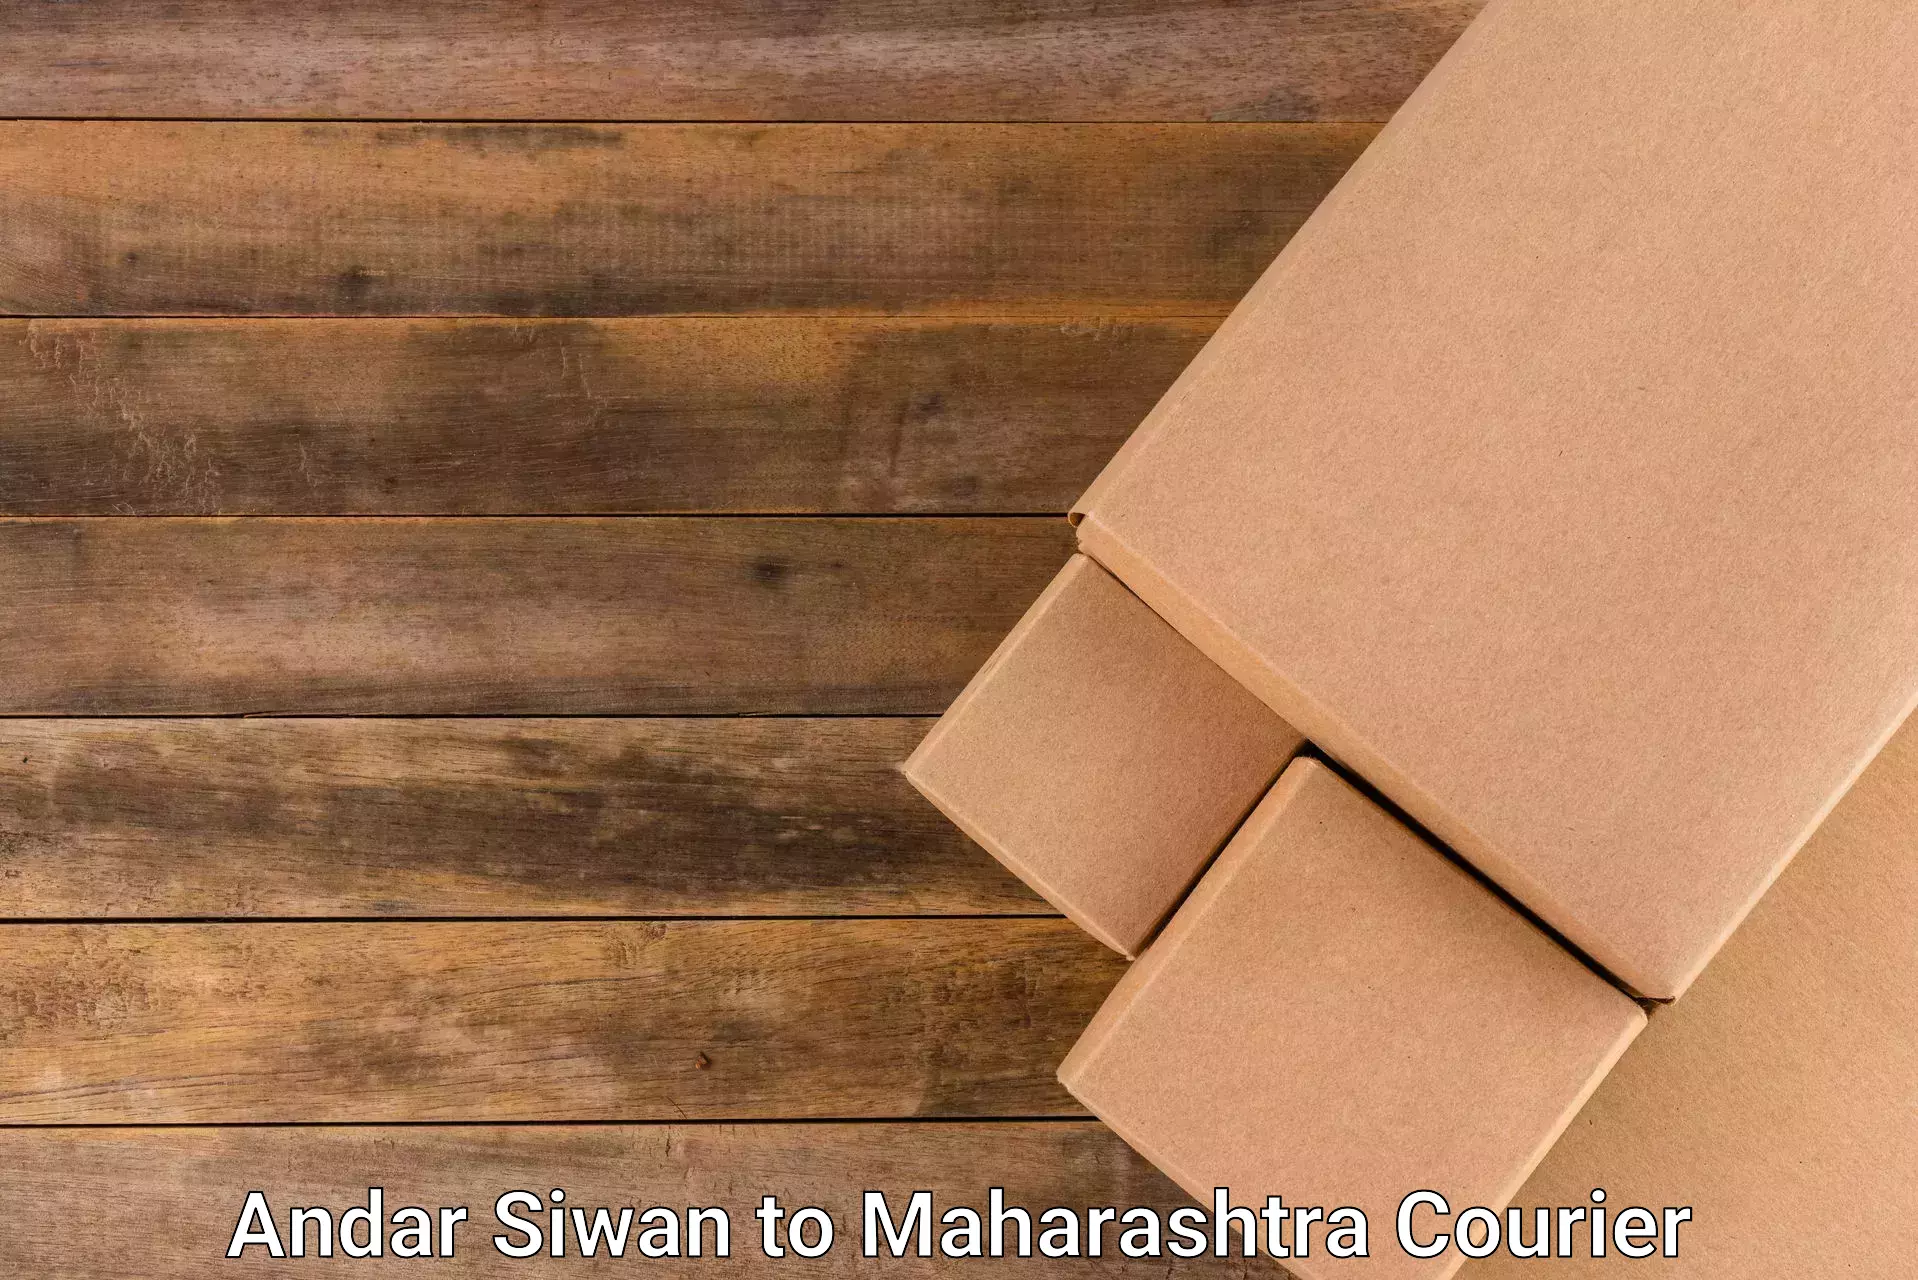 Local delivery service Andar Siwan to Maharashtra